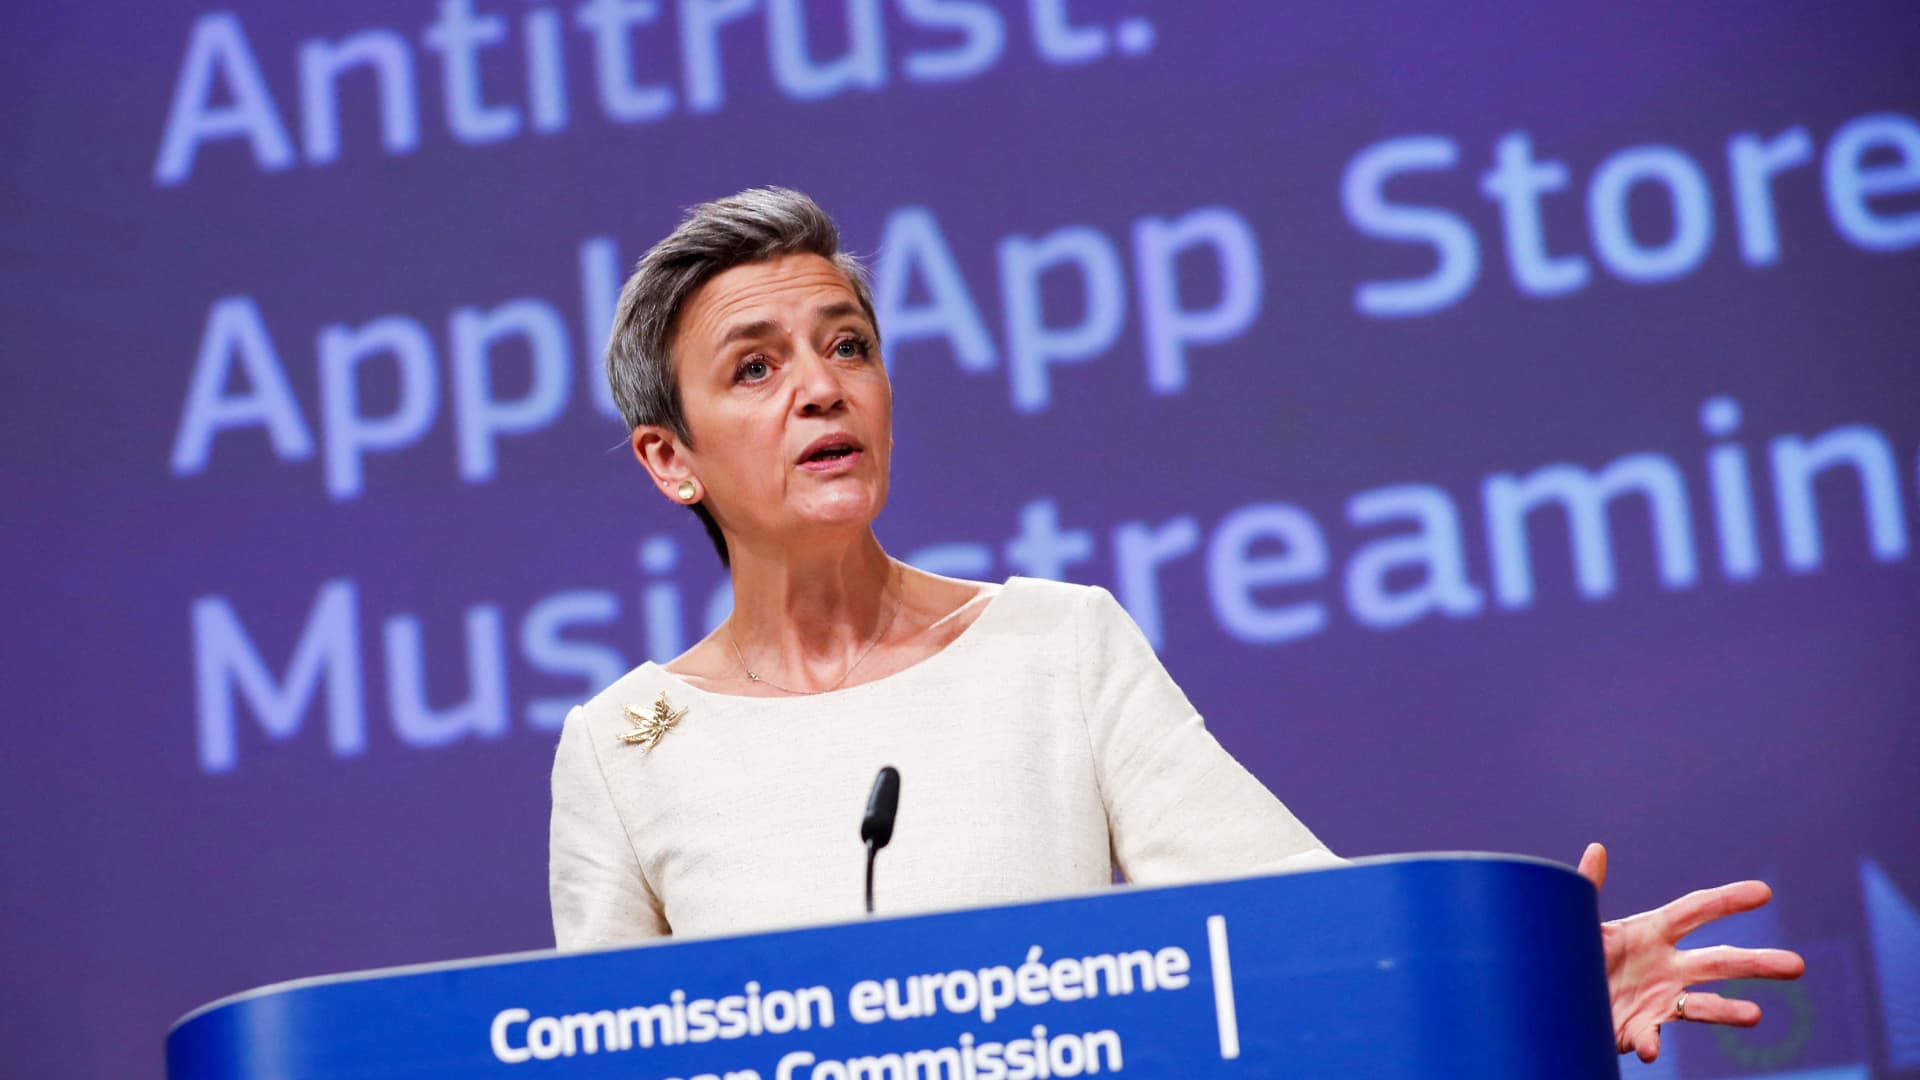 European Commissioner for Europe fit for the Digital Age, Margrethe Vestager, gestures as she speaks during an online news conference on Apple antitrust case at the EU headquarters in Brussels, on April 30, 2021.